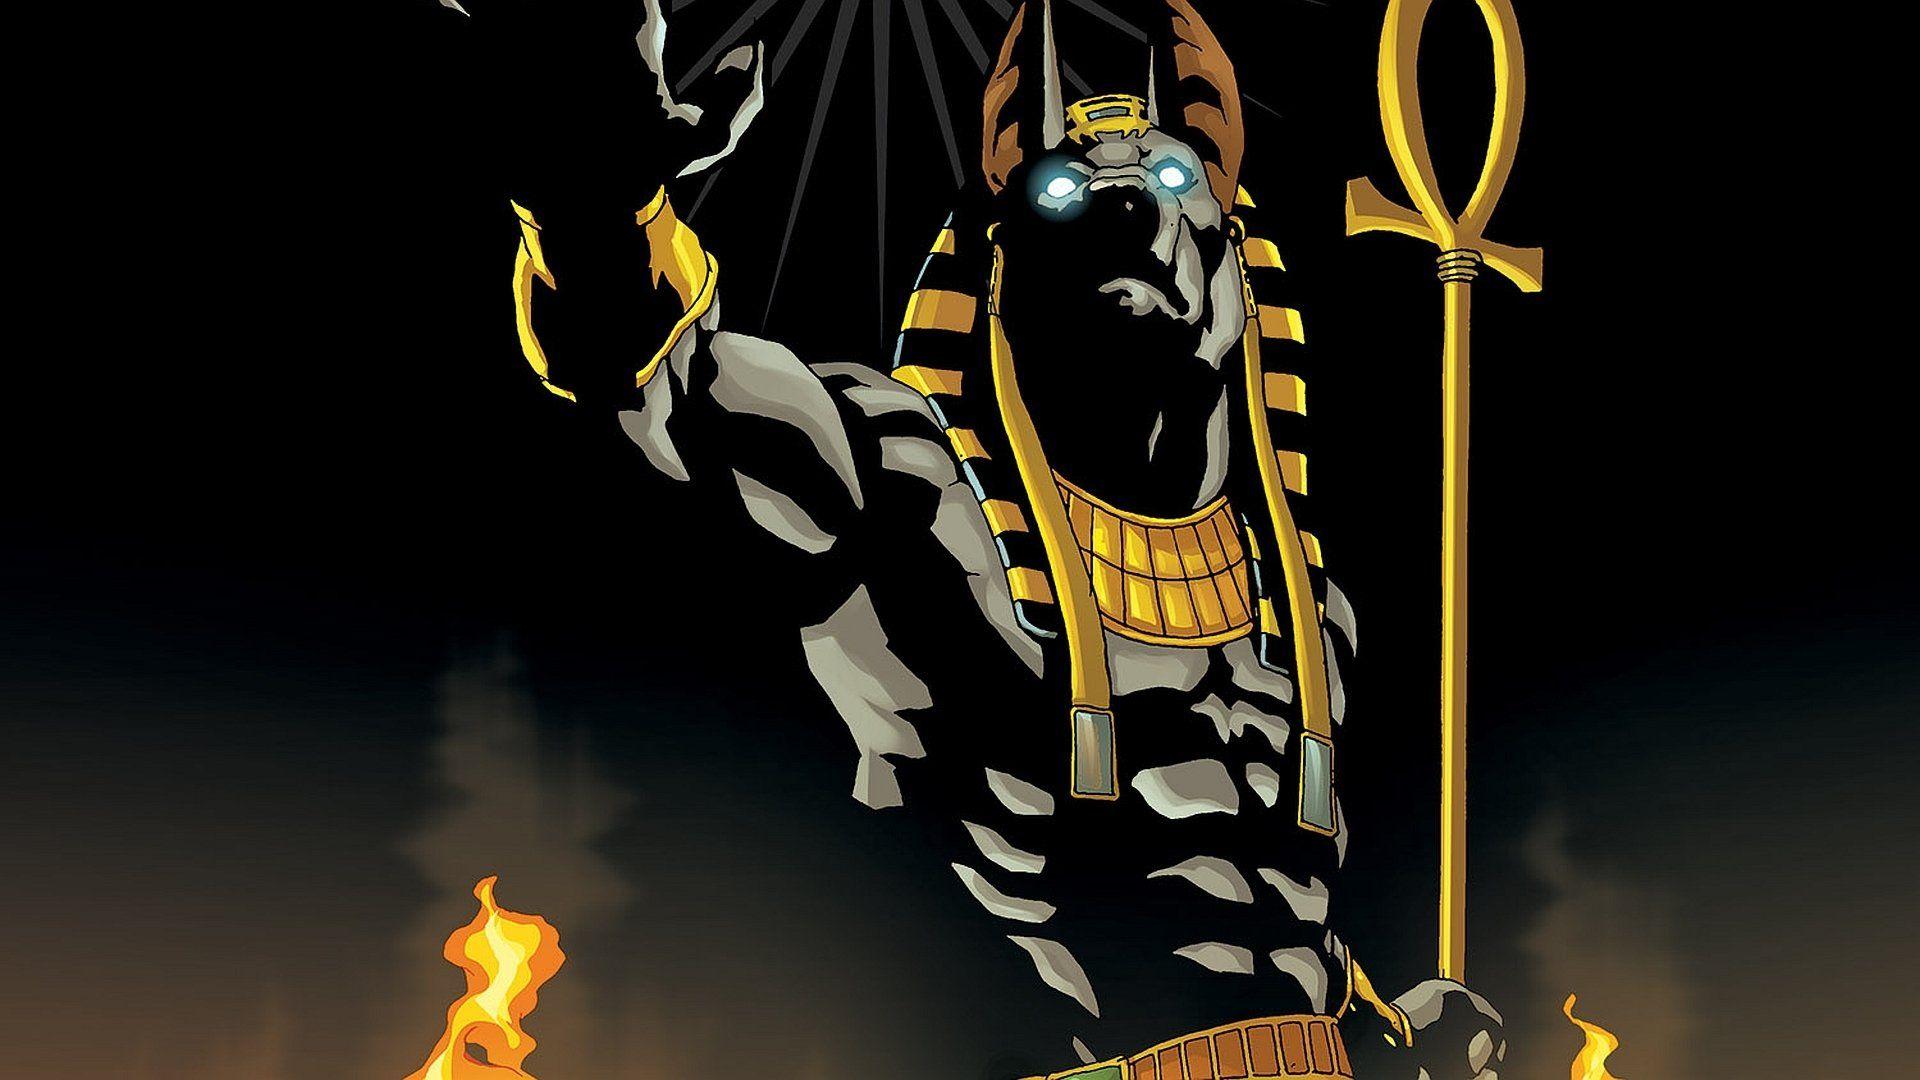 Anubis HD Wallpaper and Background Image